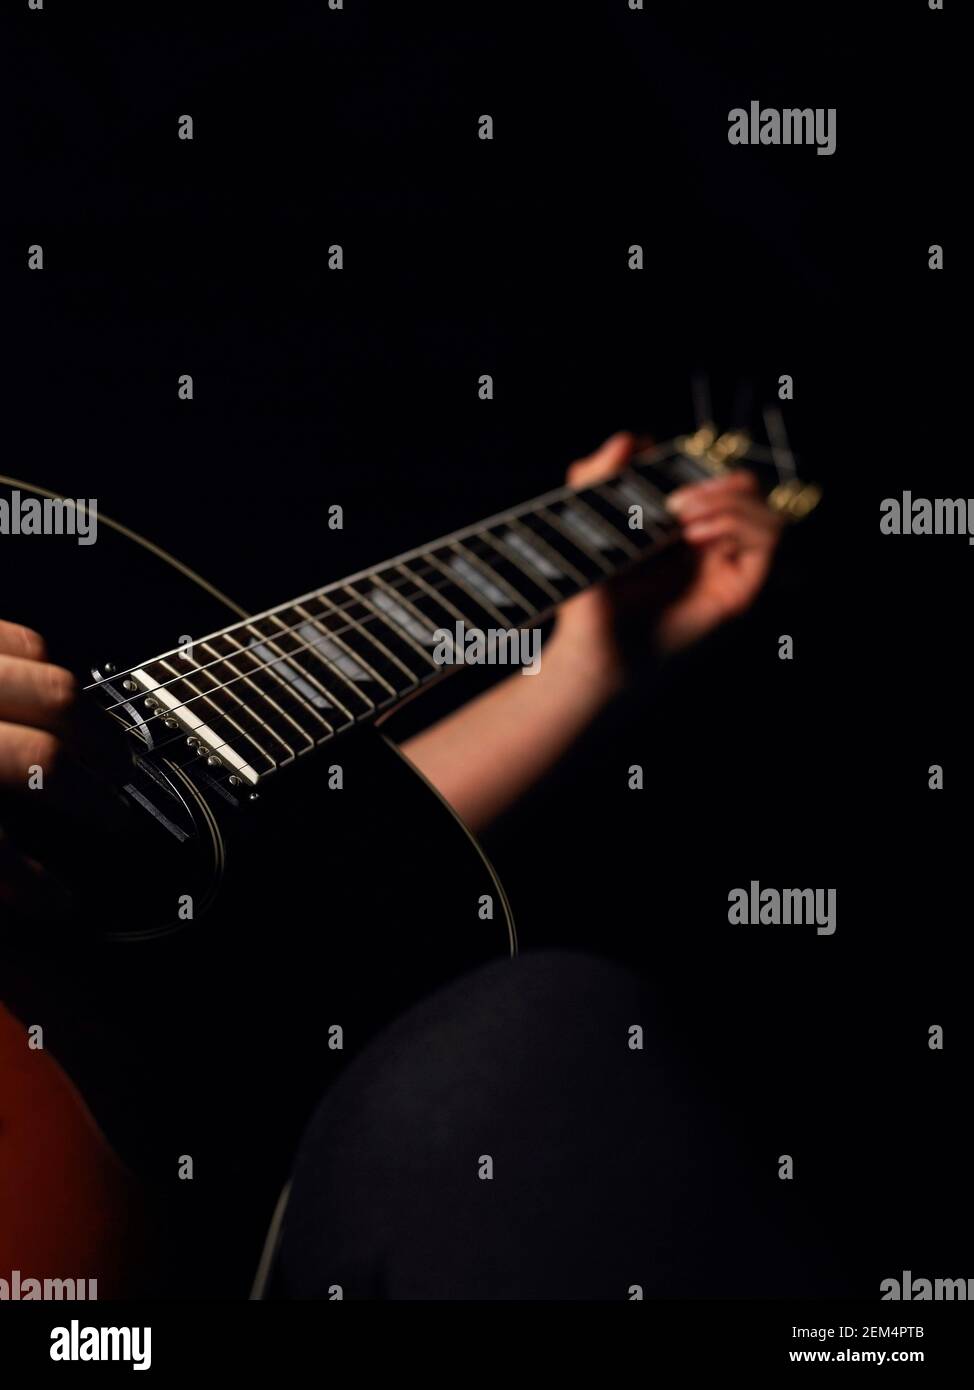 Close-up of a person's hands playing a guitar Stock Photo